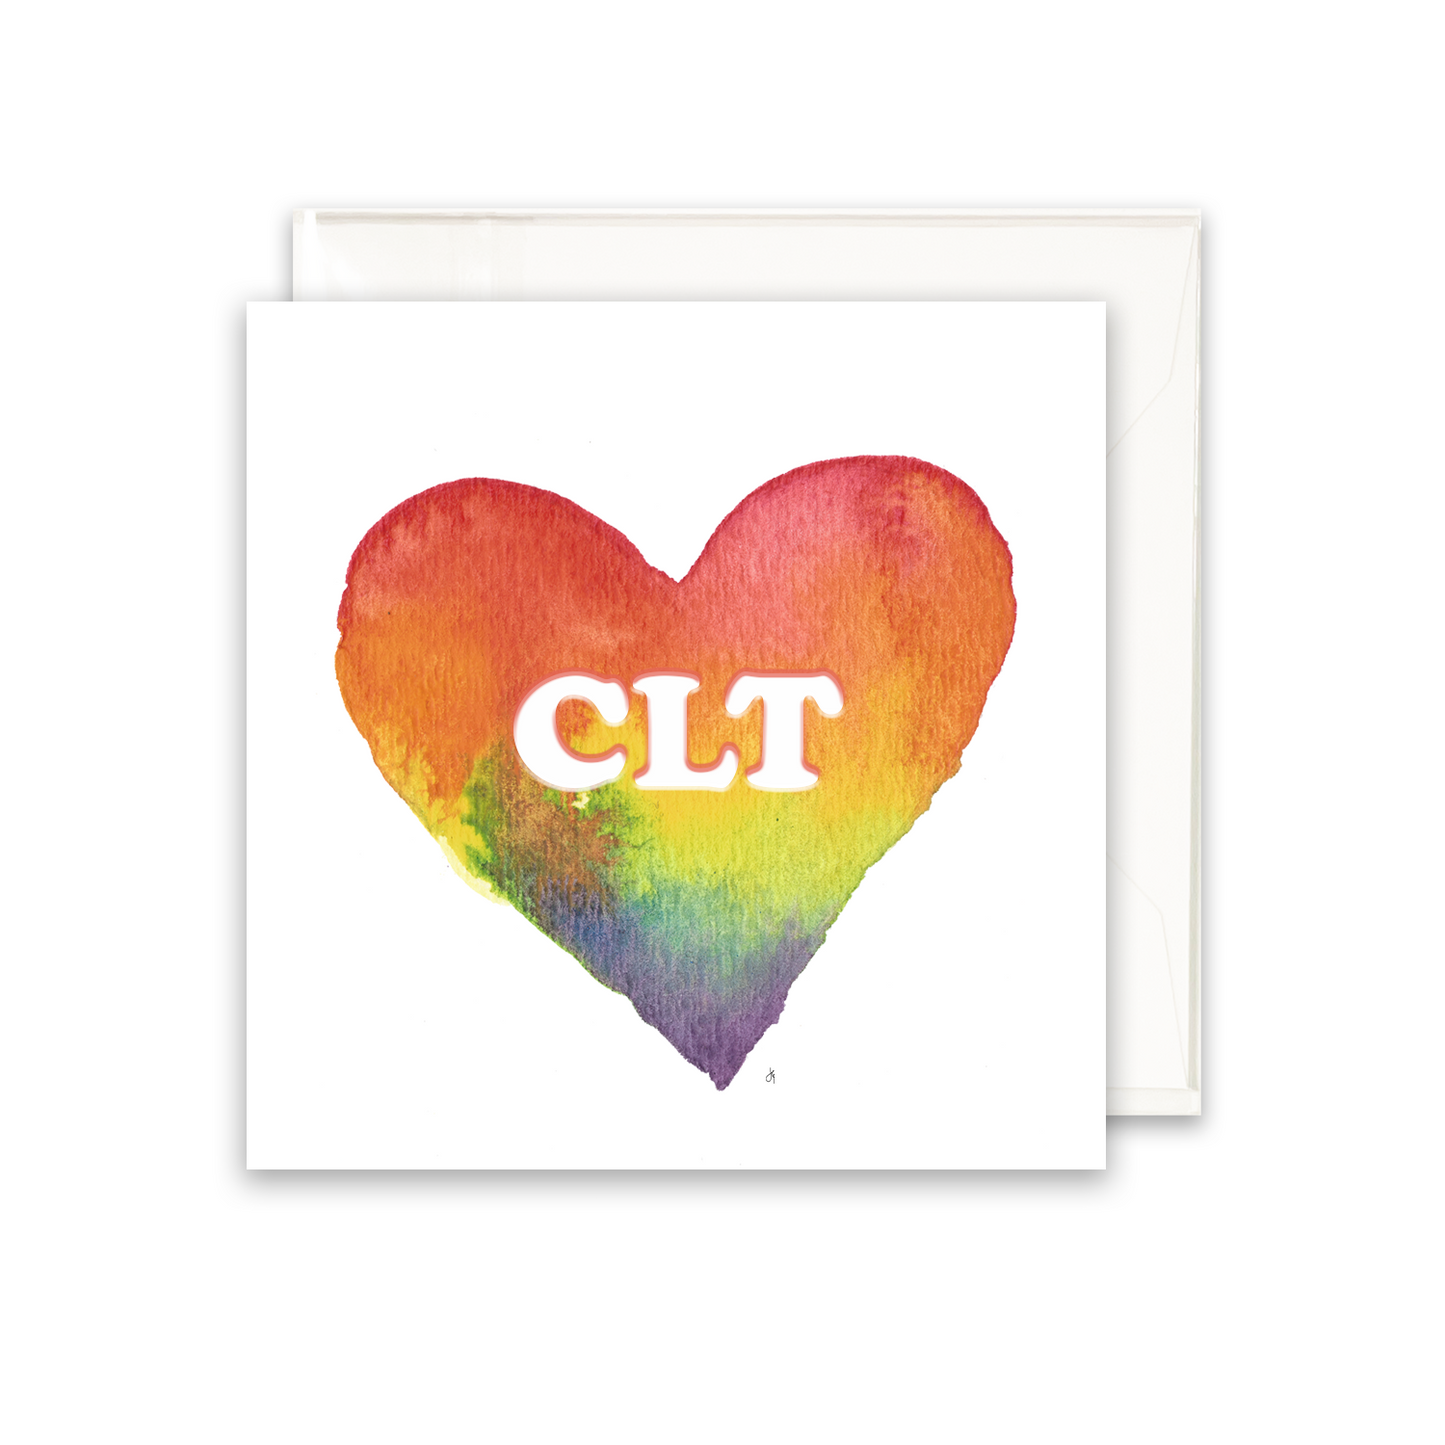 heart that has a rainbow gradient, CLT in the middle for the city of Charlotte, enclosure card, blank